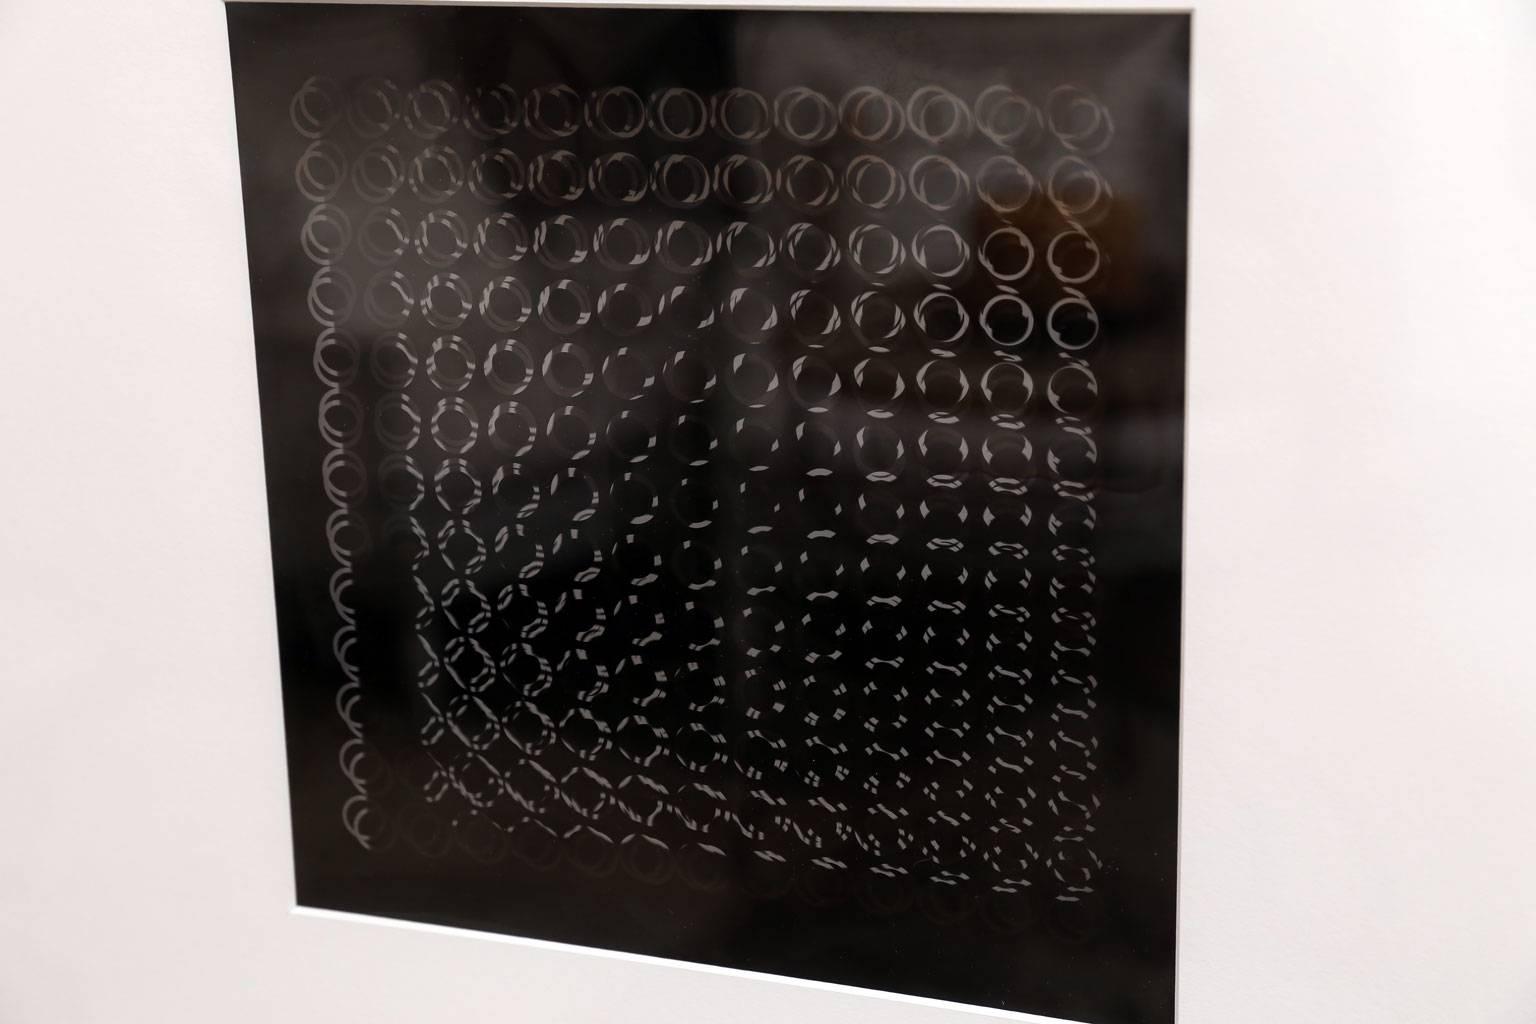 Original Victor Vasarely Oeuvres Profondes, Editions Du Griffon Neuchâtel, 1973. Silk screen on transparency over printed rag paper. Unsigned and framed in a black painted wooden shadowbox. This print would make an excellent set of two with item